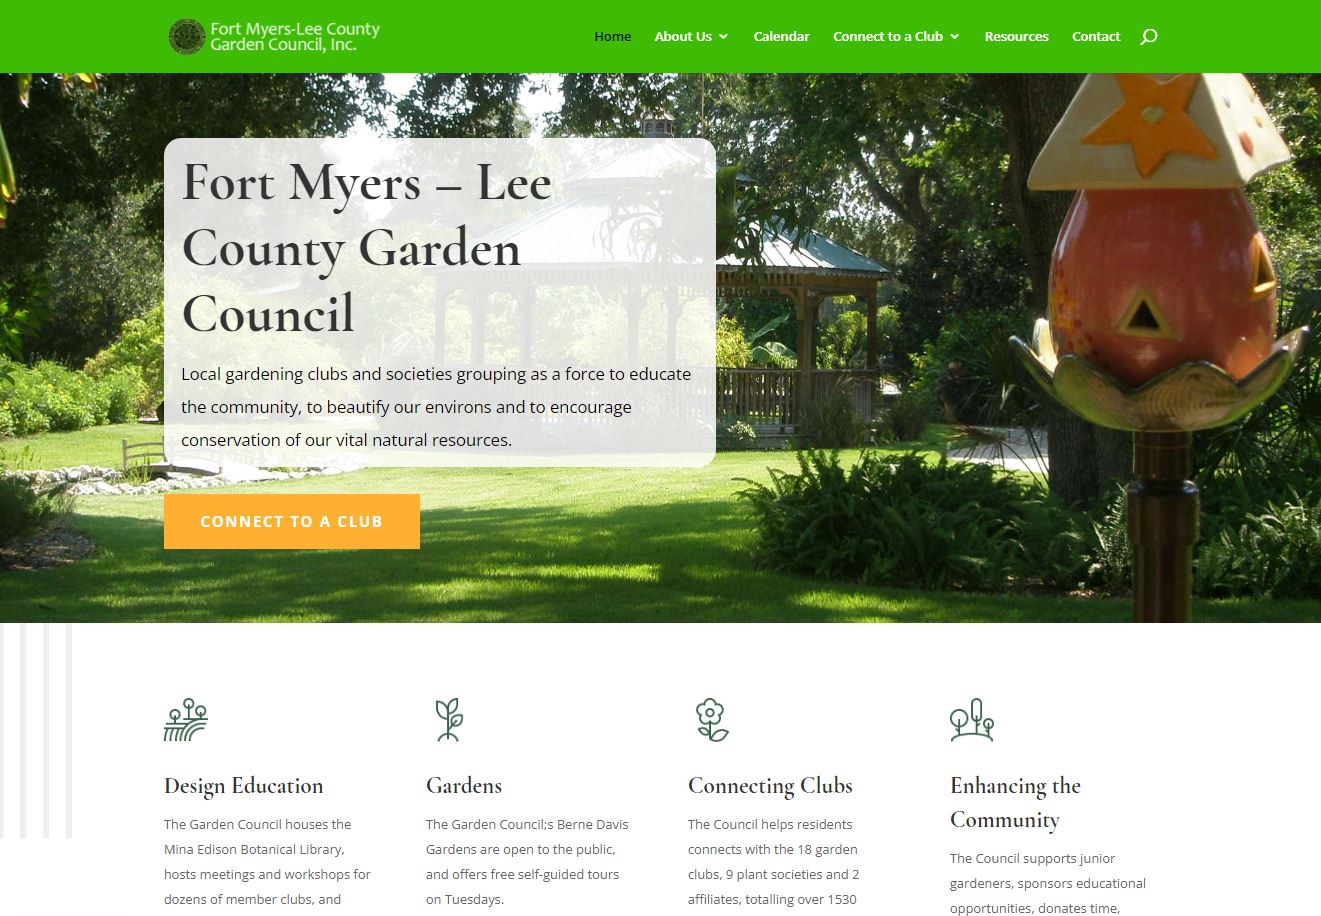 Fort Myers Lee County Garden Council